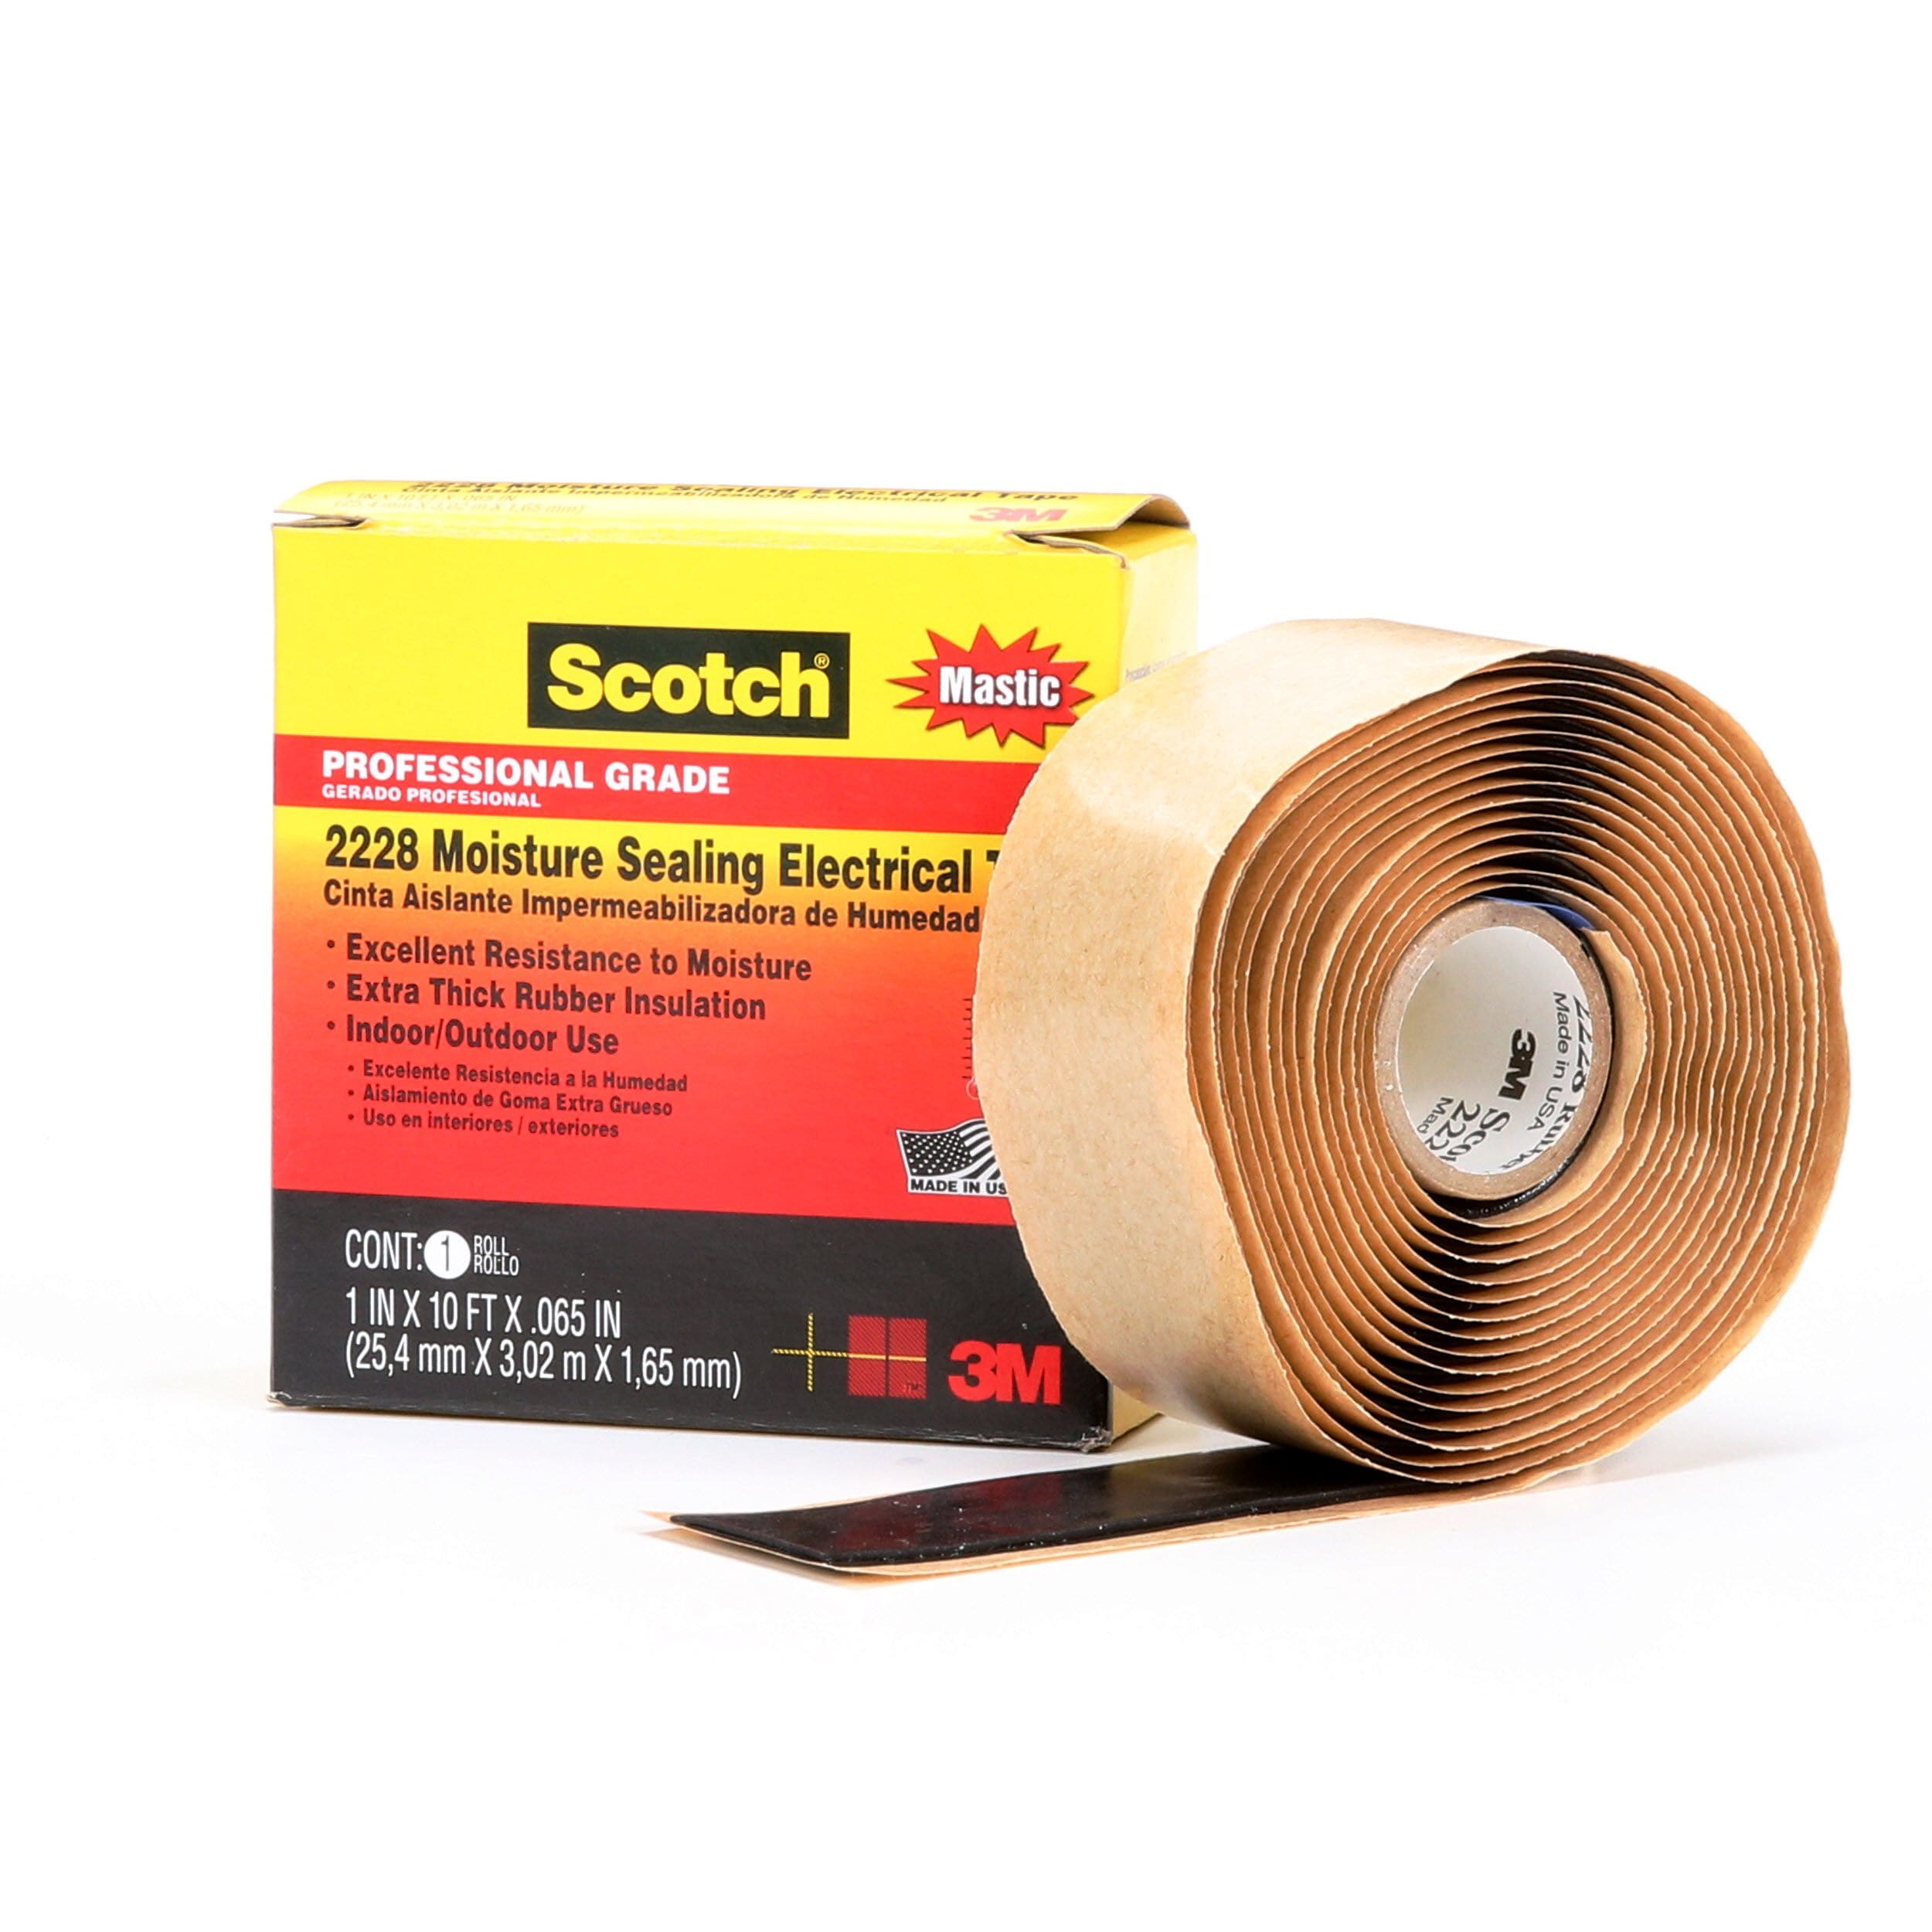 Electrical Insulation Tape 50mmx3Mx1.65mm 3M 2228# Rubber Mastic Tape 